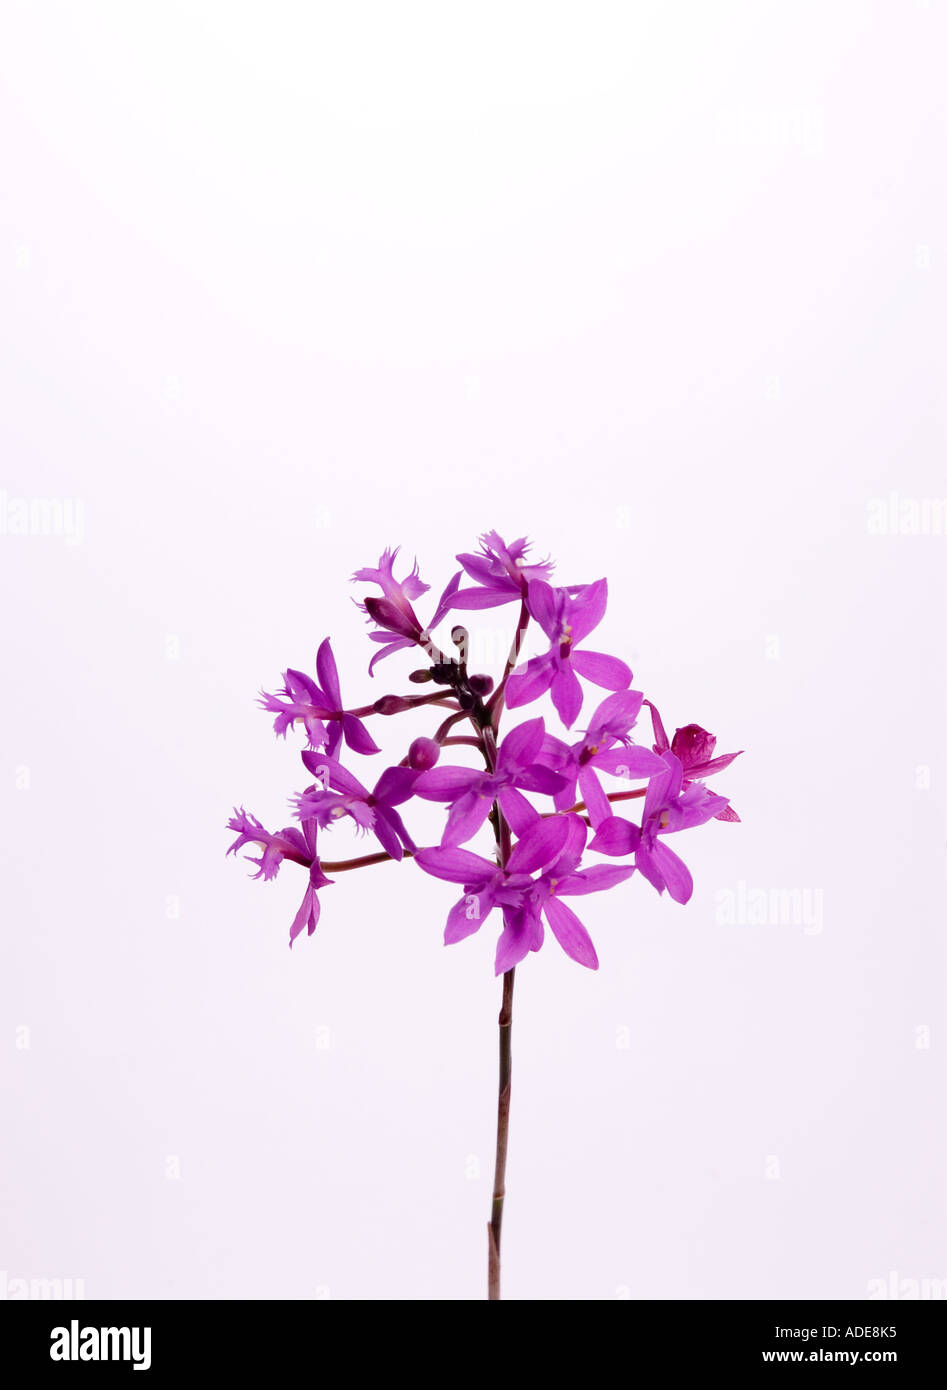 Stock photograph of a stem of mauve crucifix orchids Epidendrum radicans DSC 9353 Stock Photo